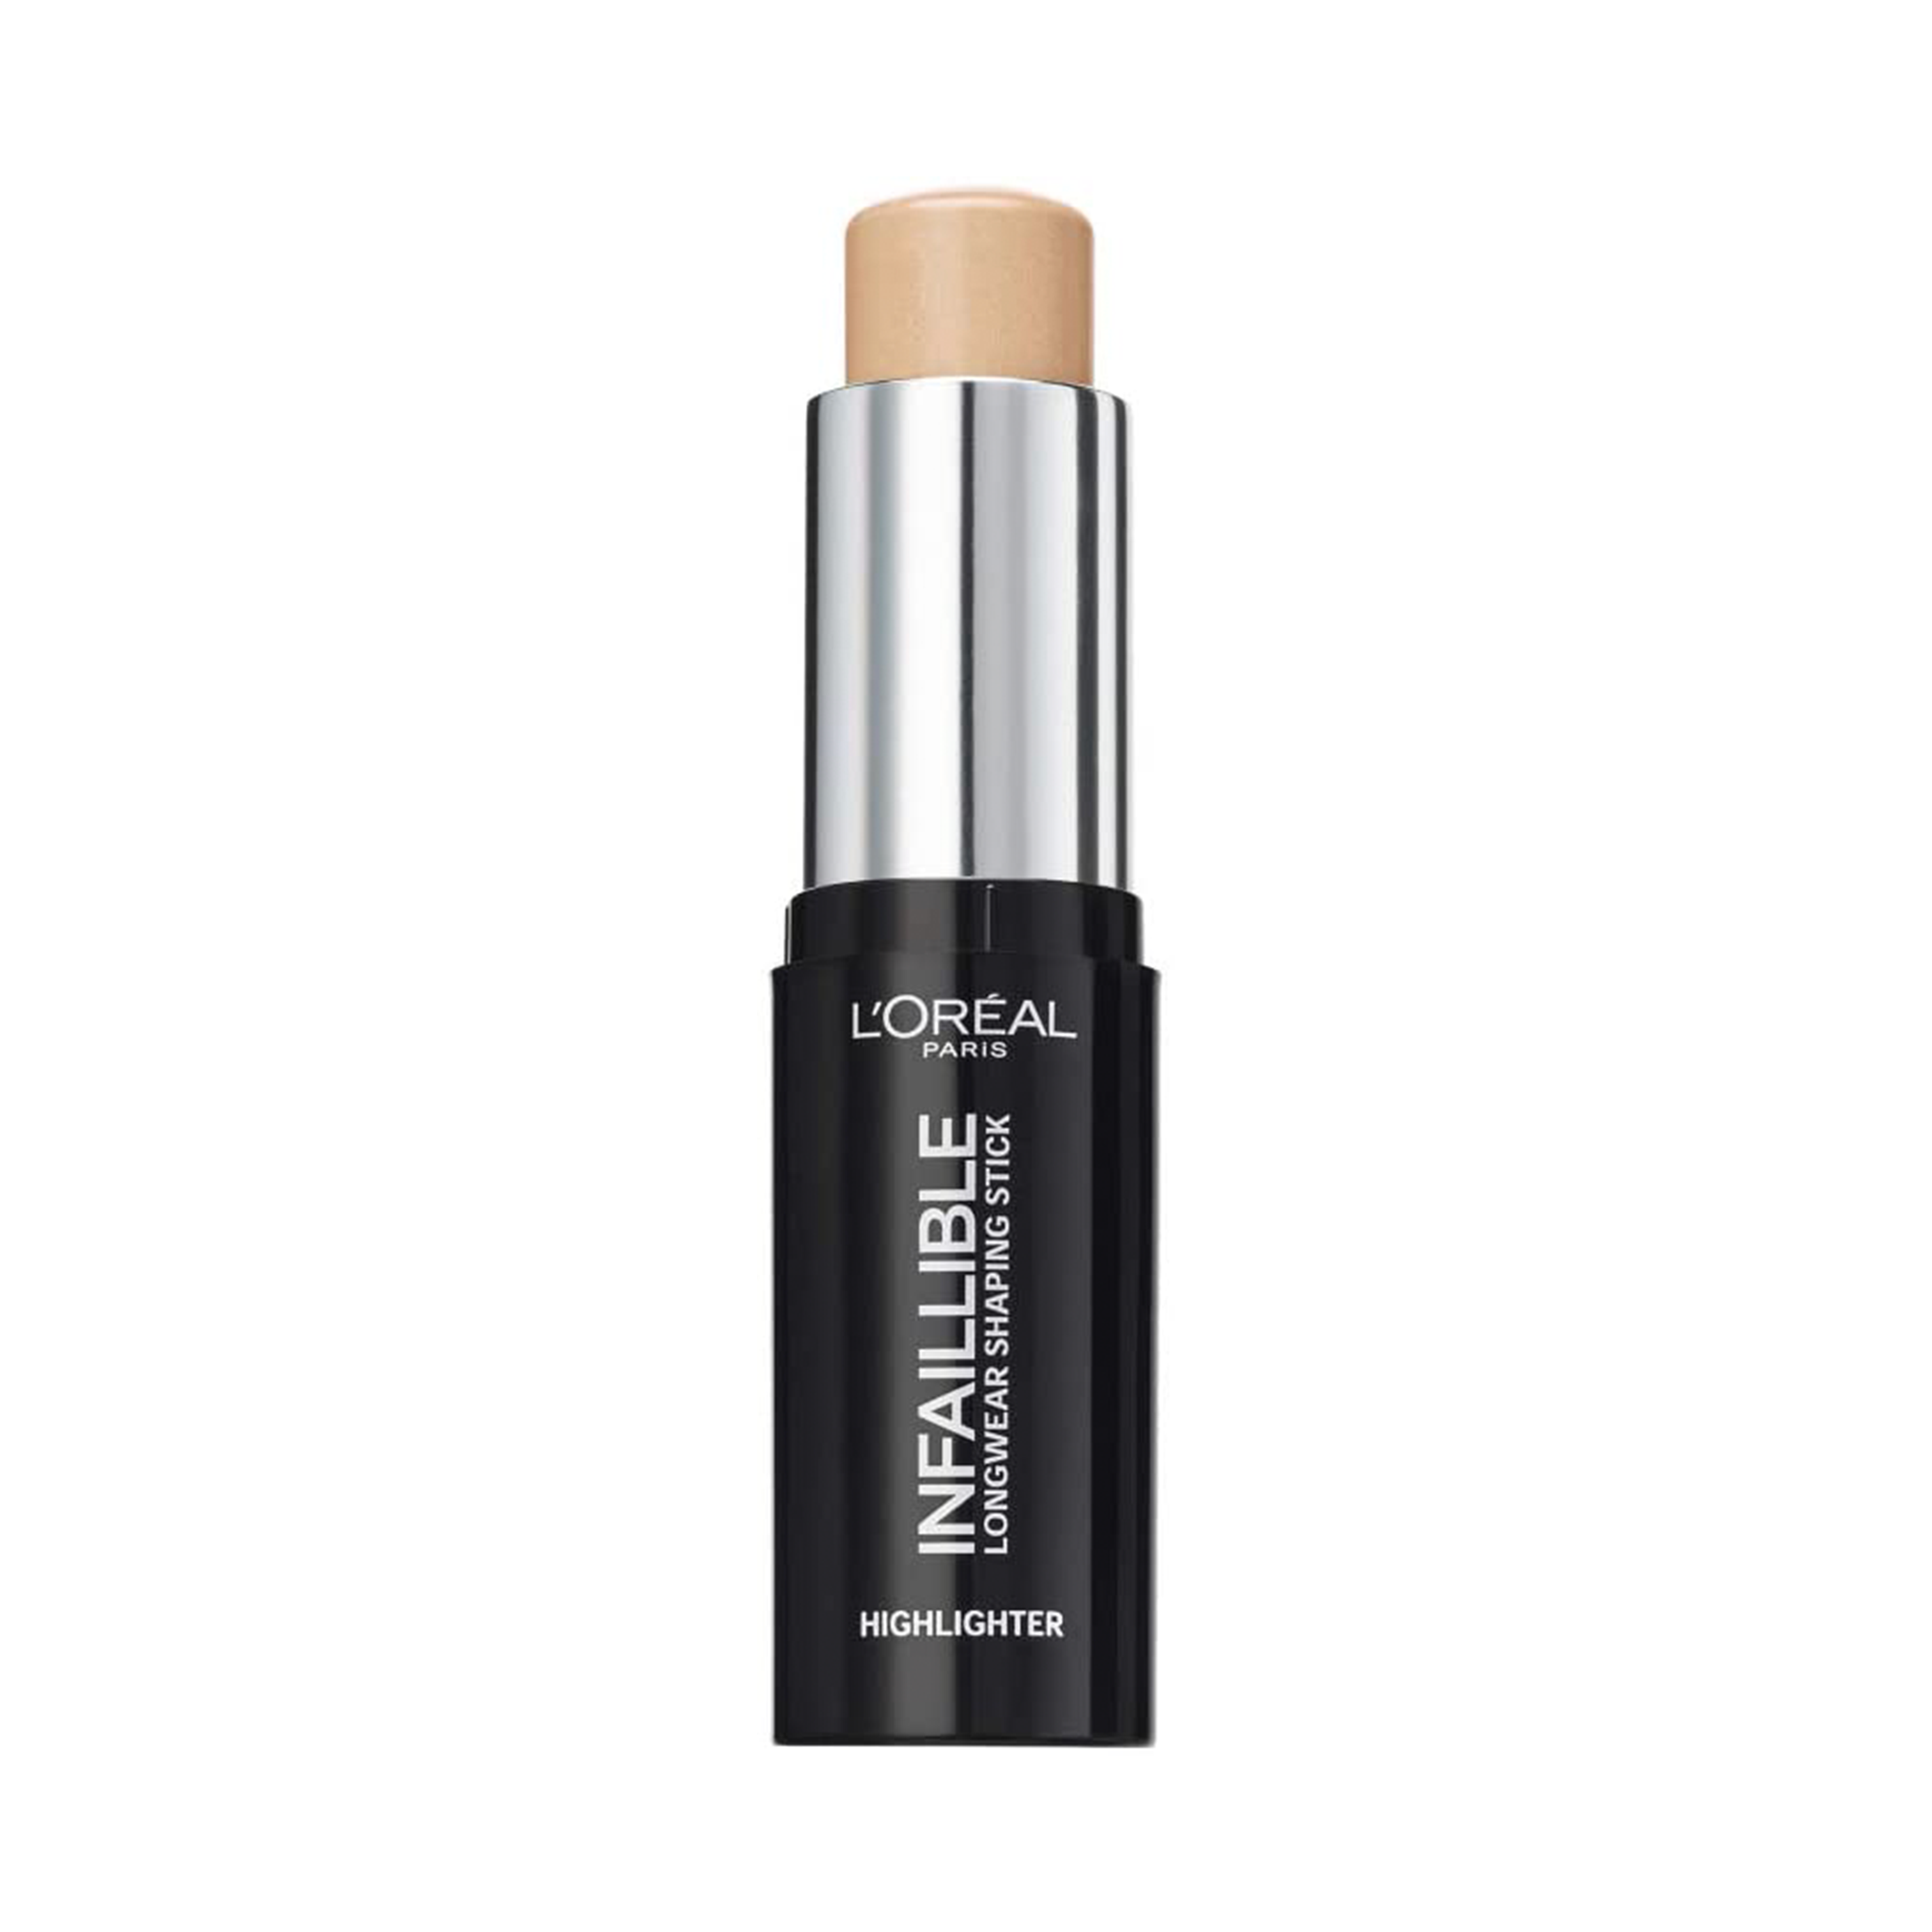 L'Oreal Infiallible Longwear Shaping Stick Highlighter Stick - 502 Gold Is Cold